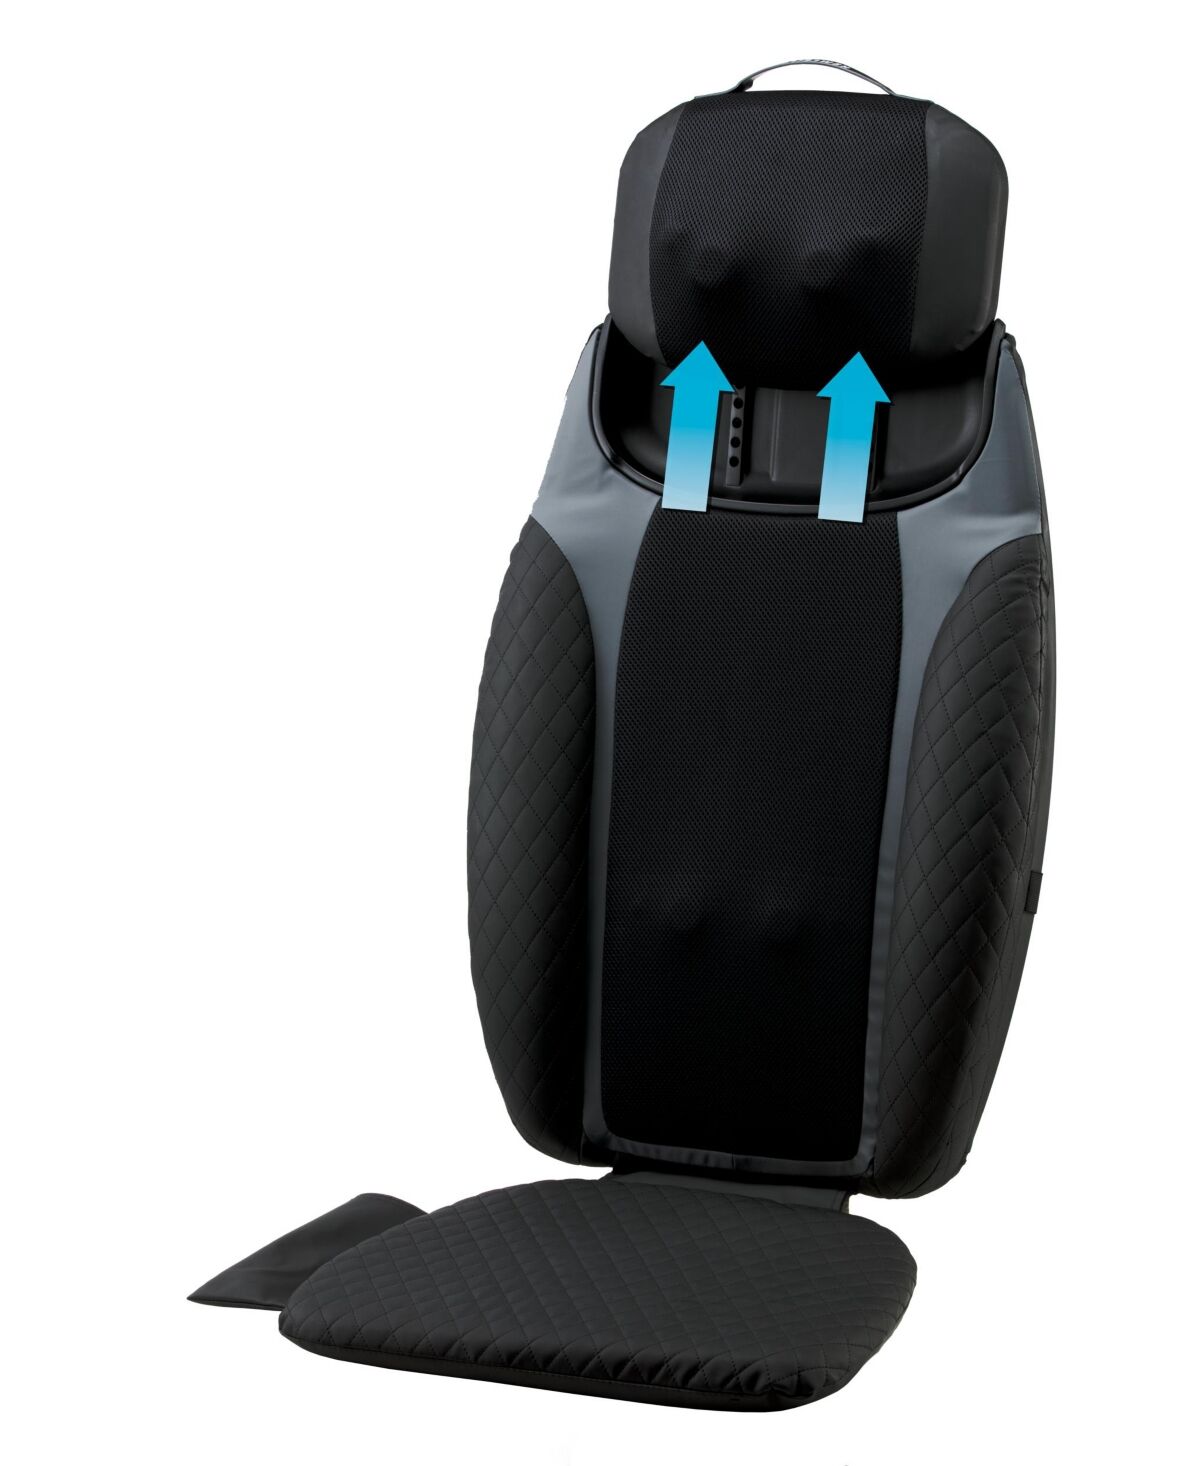 HoMedics 2-in-1 Shiatsu Massaging Seat Topper with Removable Massage Pillow and Heat - Black